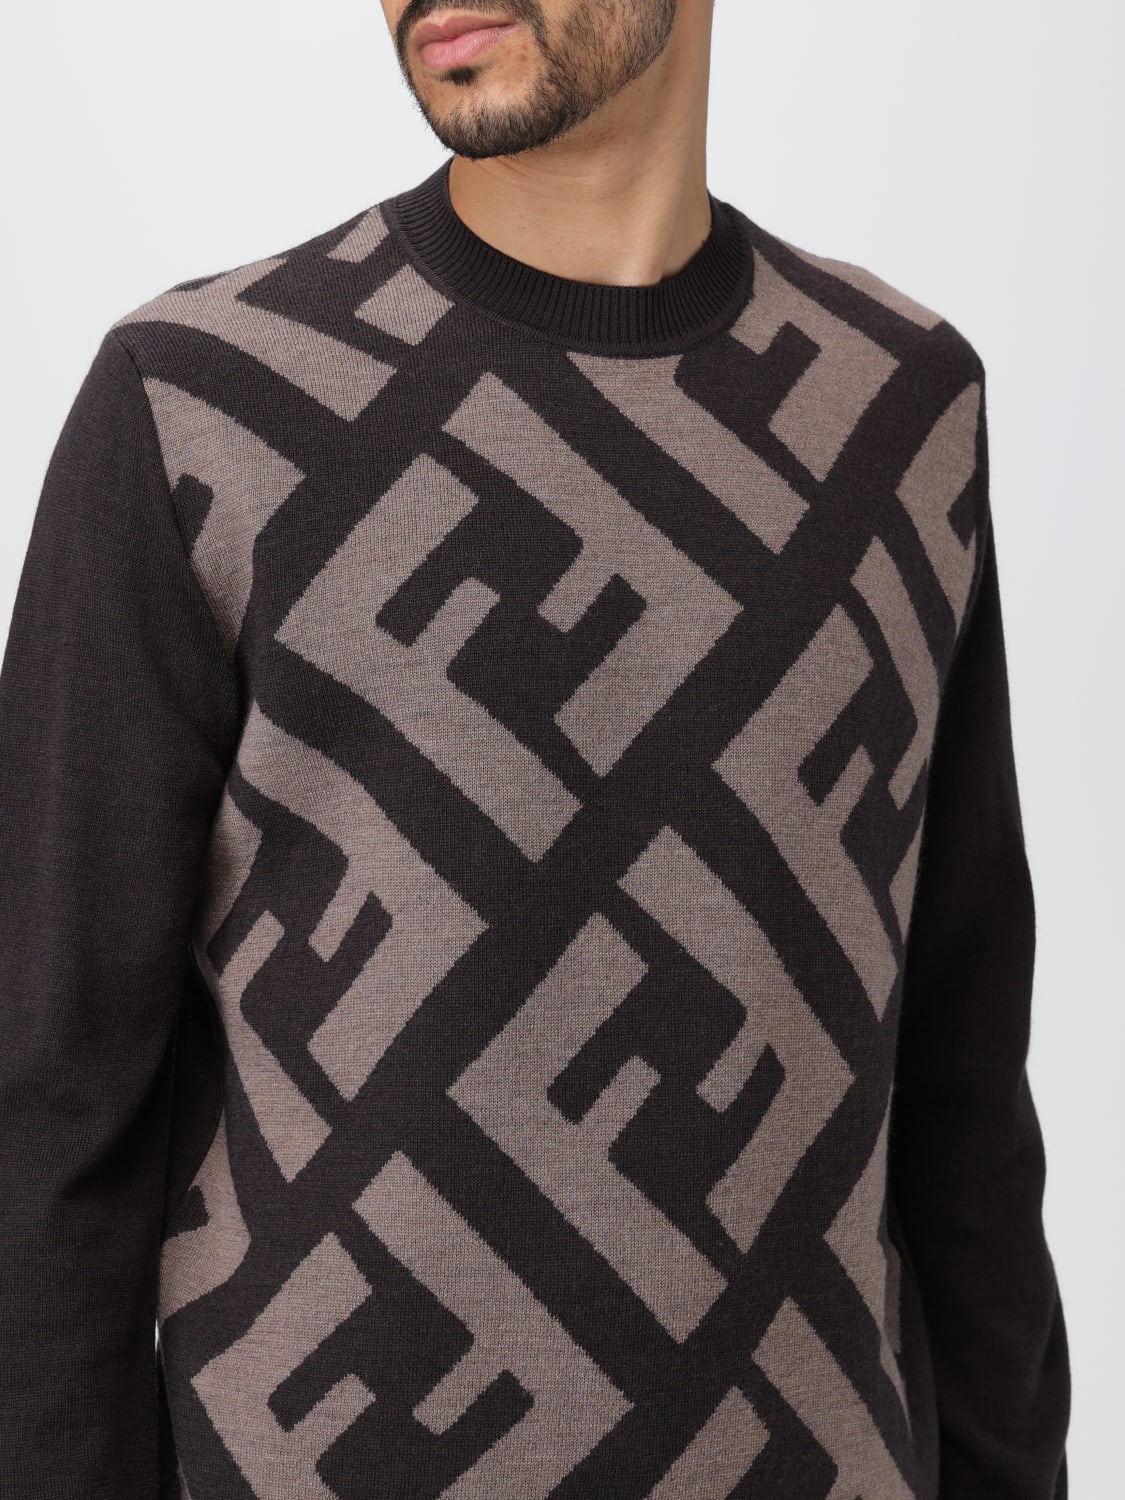 Fendi Wool Sweater with All Over Monogram